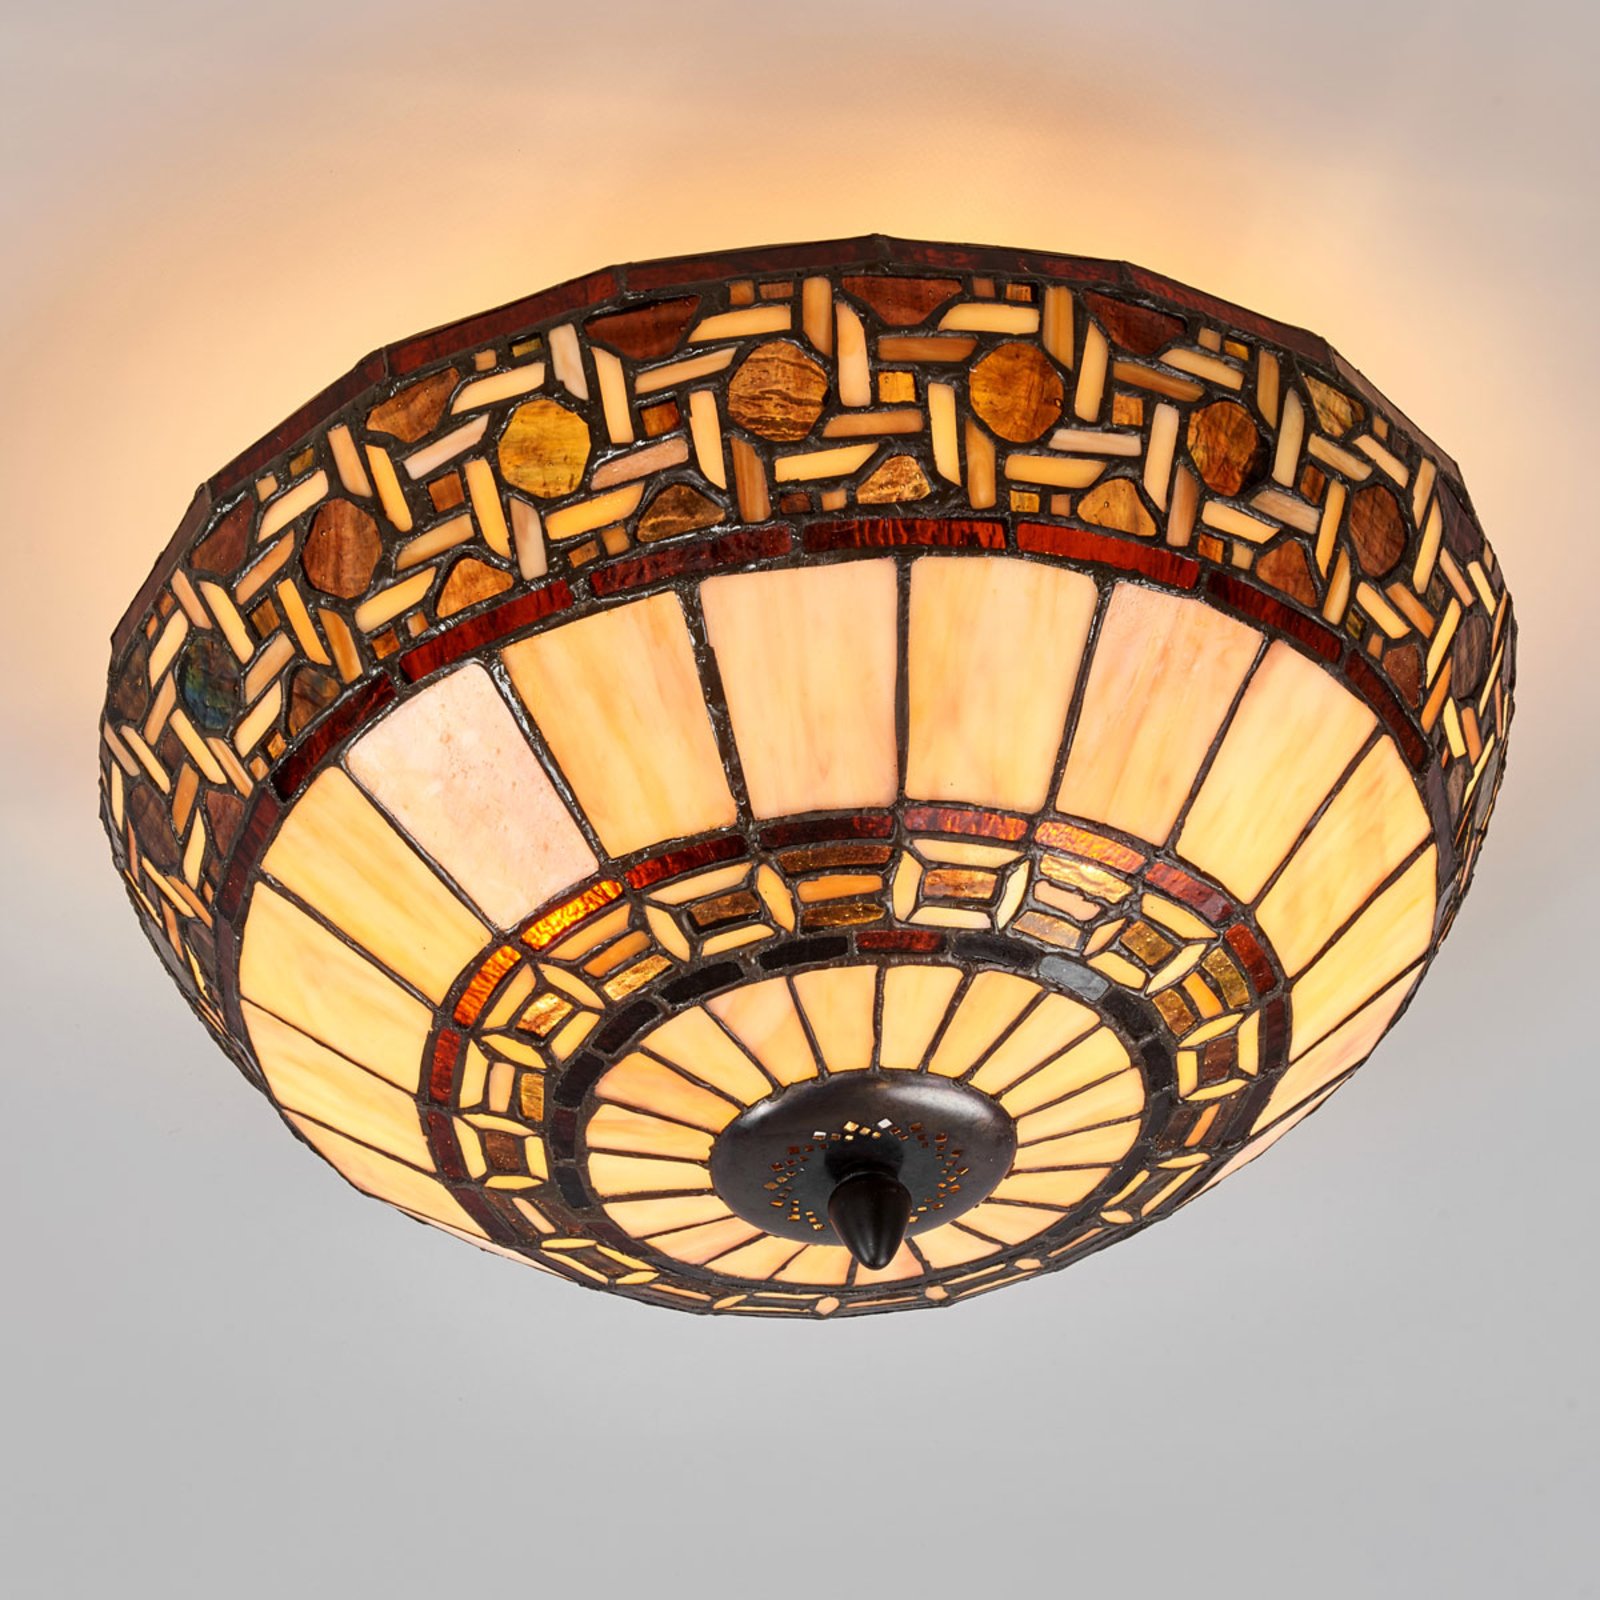 Ceiling lamp Wilma in the Tiffany style